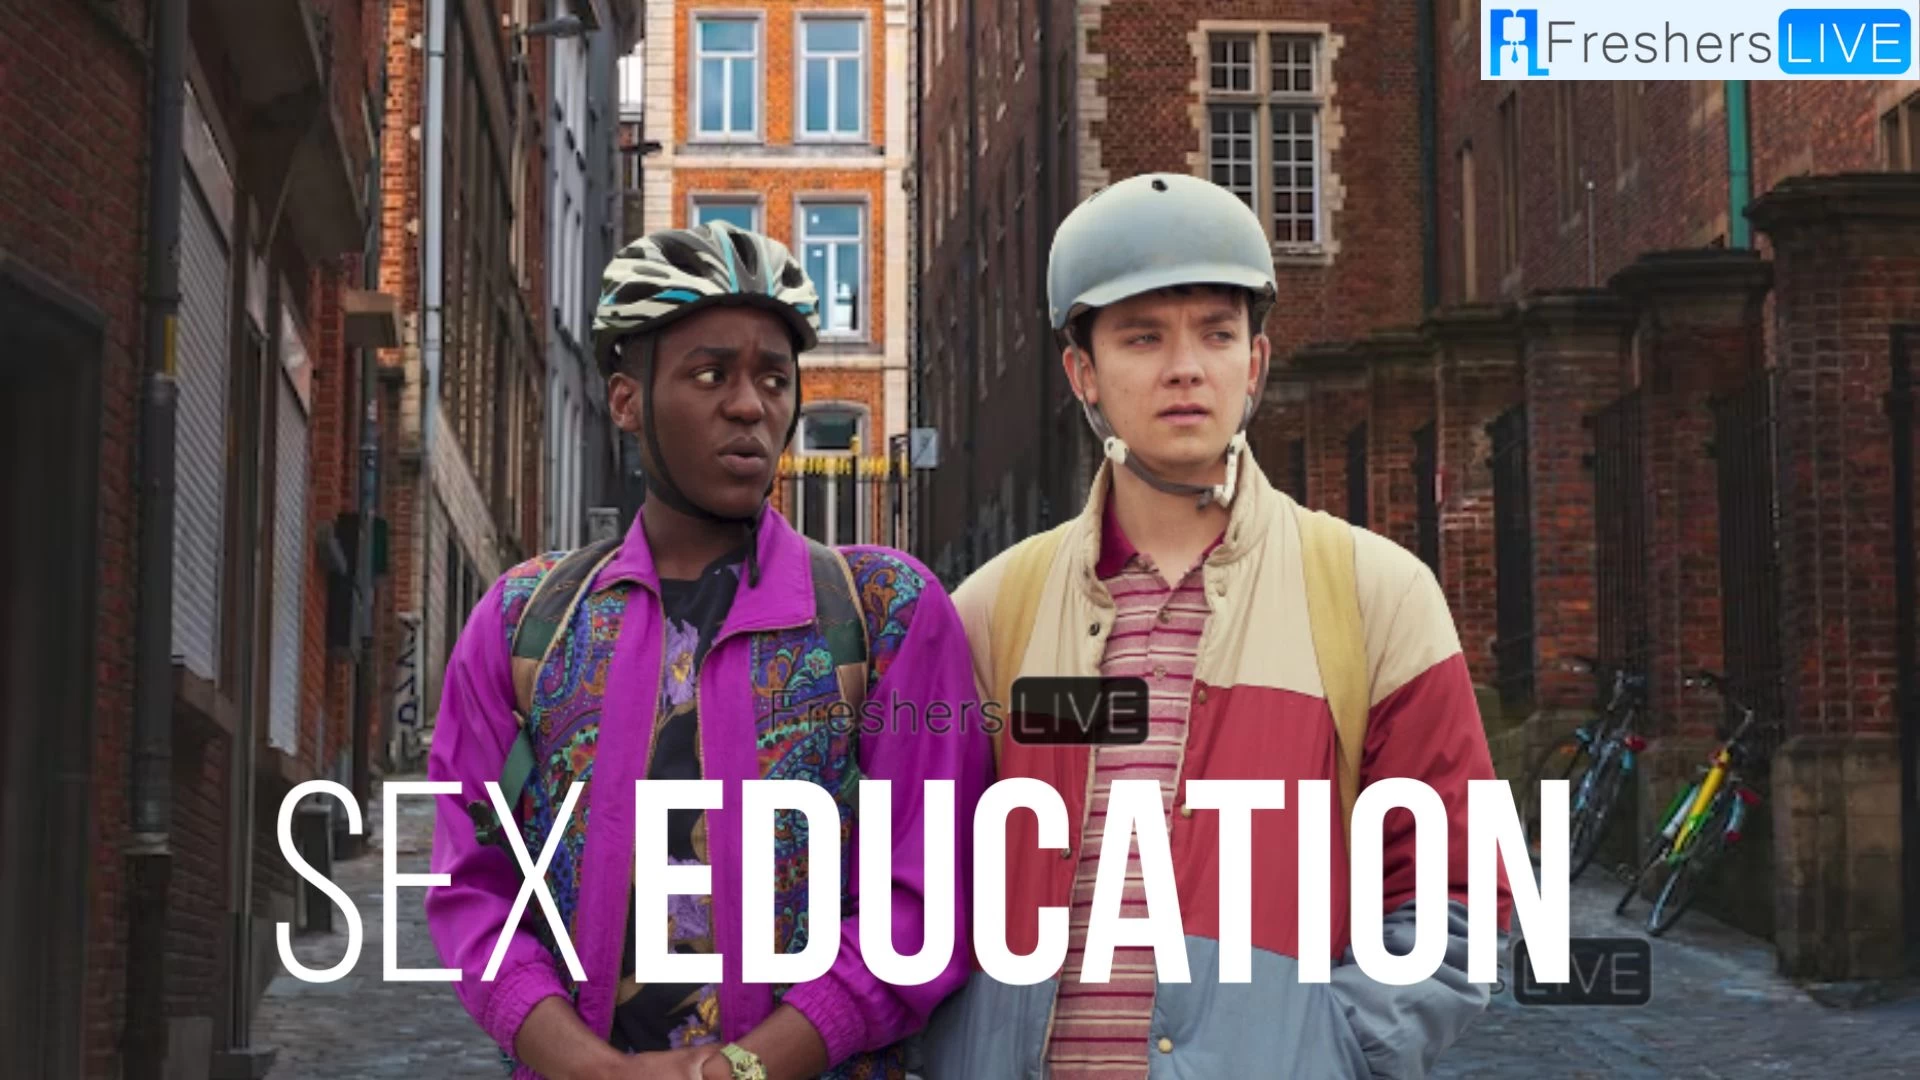 Sex Education Season 4 Recap and Ending Explained, Cast, Trailer and More